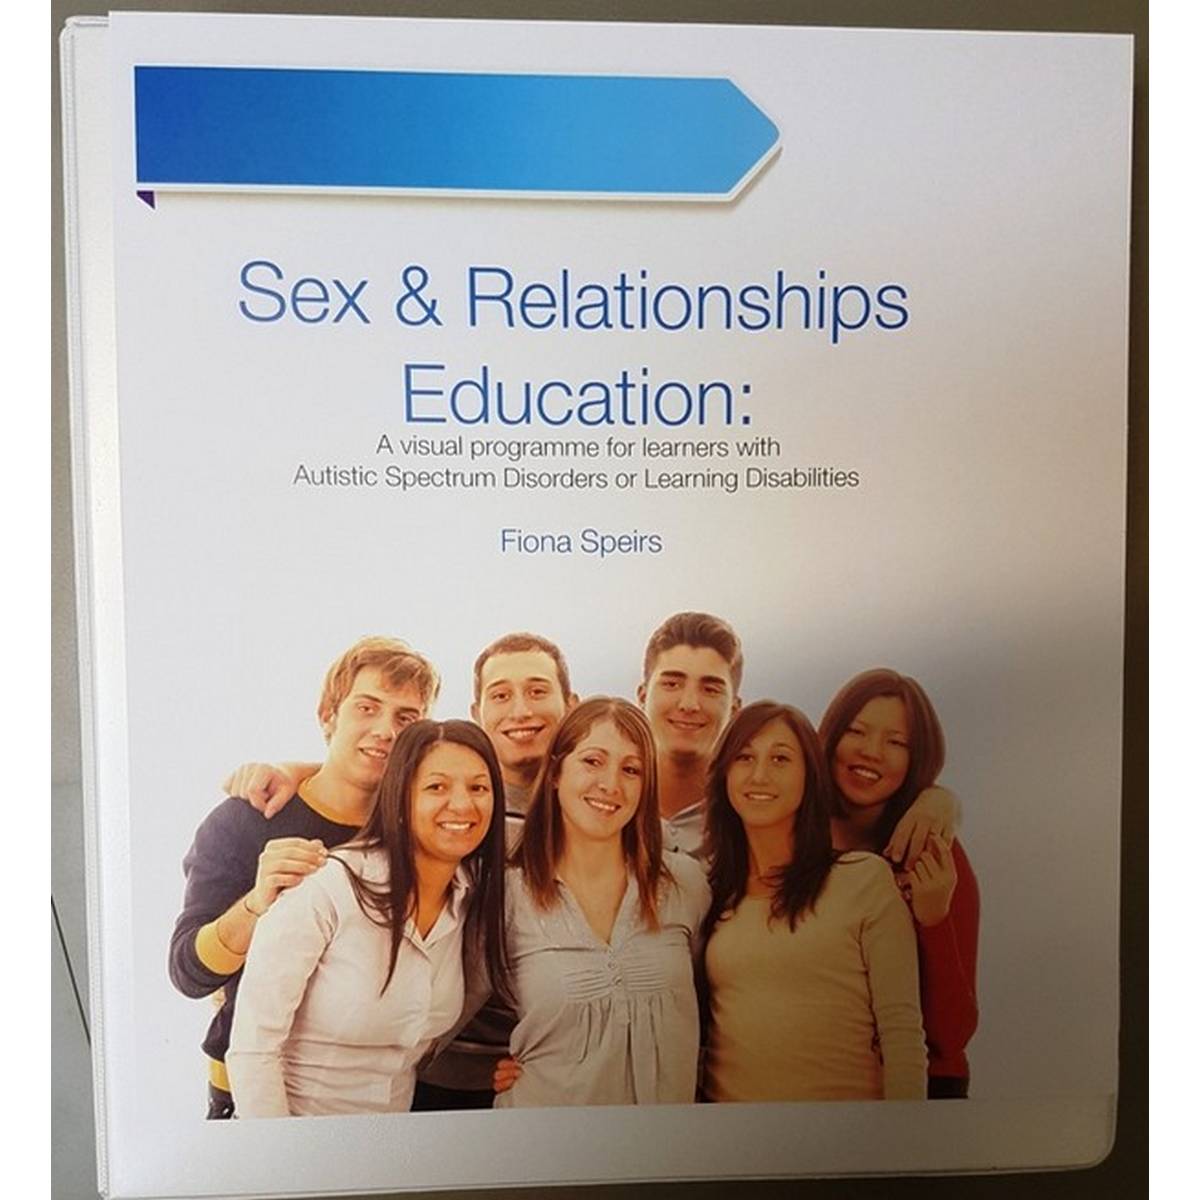 Sex & Relationships Education: A visual programme for learners with Autistic Spectrum Disorders or Learning Disabilities by Fiona Speirs